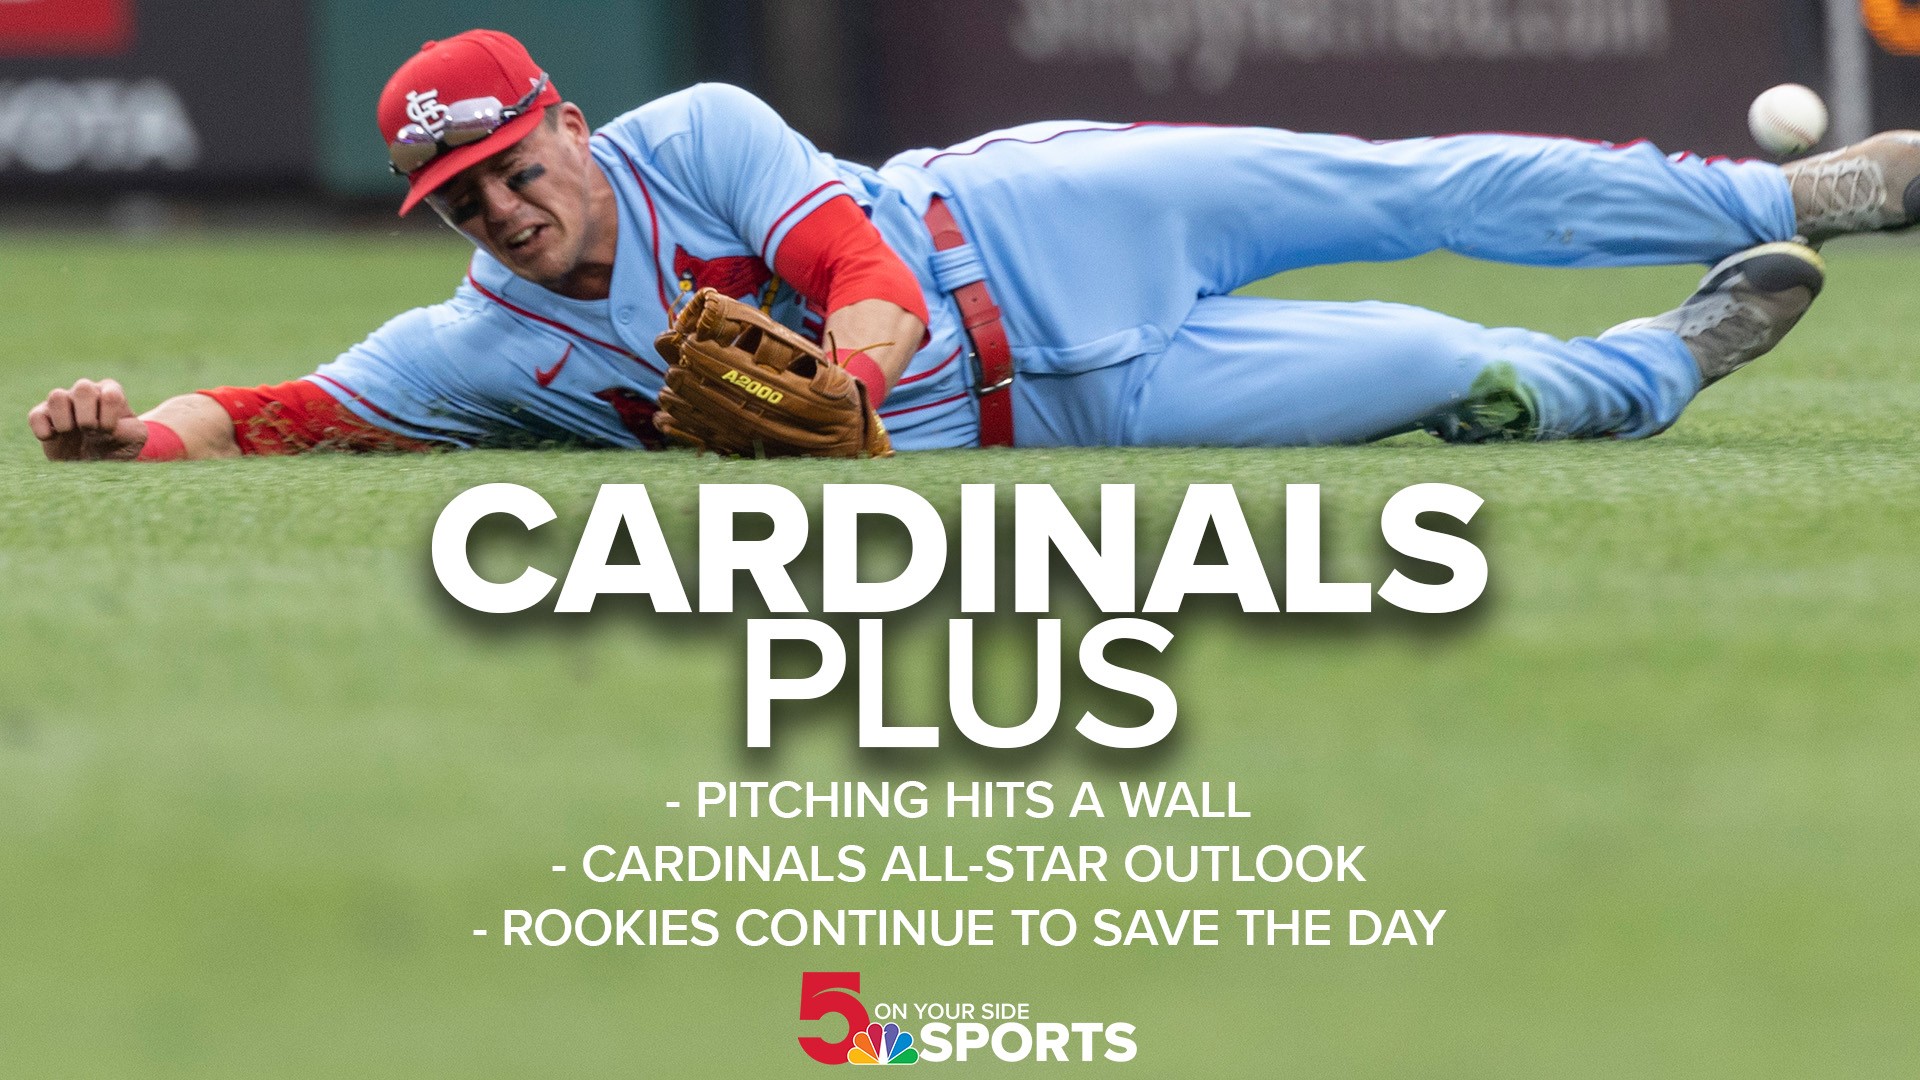 Halfway through the season, the Cardinals have hit a snag. Is it past time to add some reinforcements on the mound?